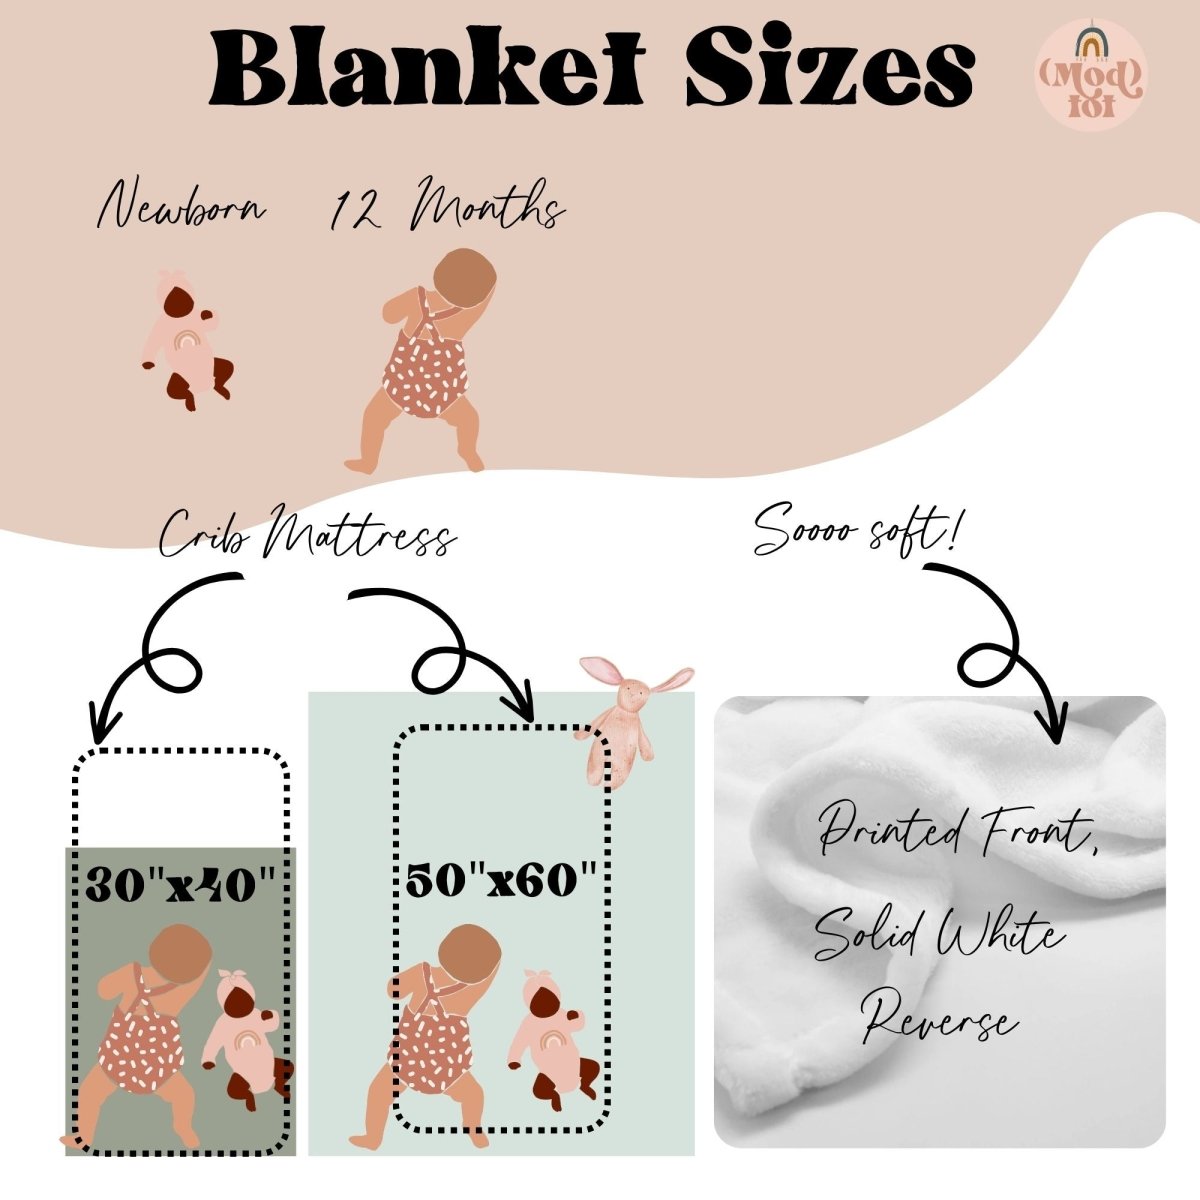 Farm Floral Personalized Minky Blanket - Farm Floral, gender_girl, Personalized_Yes